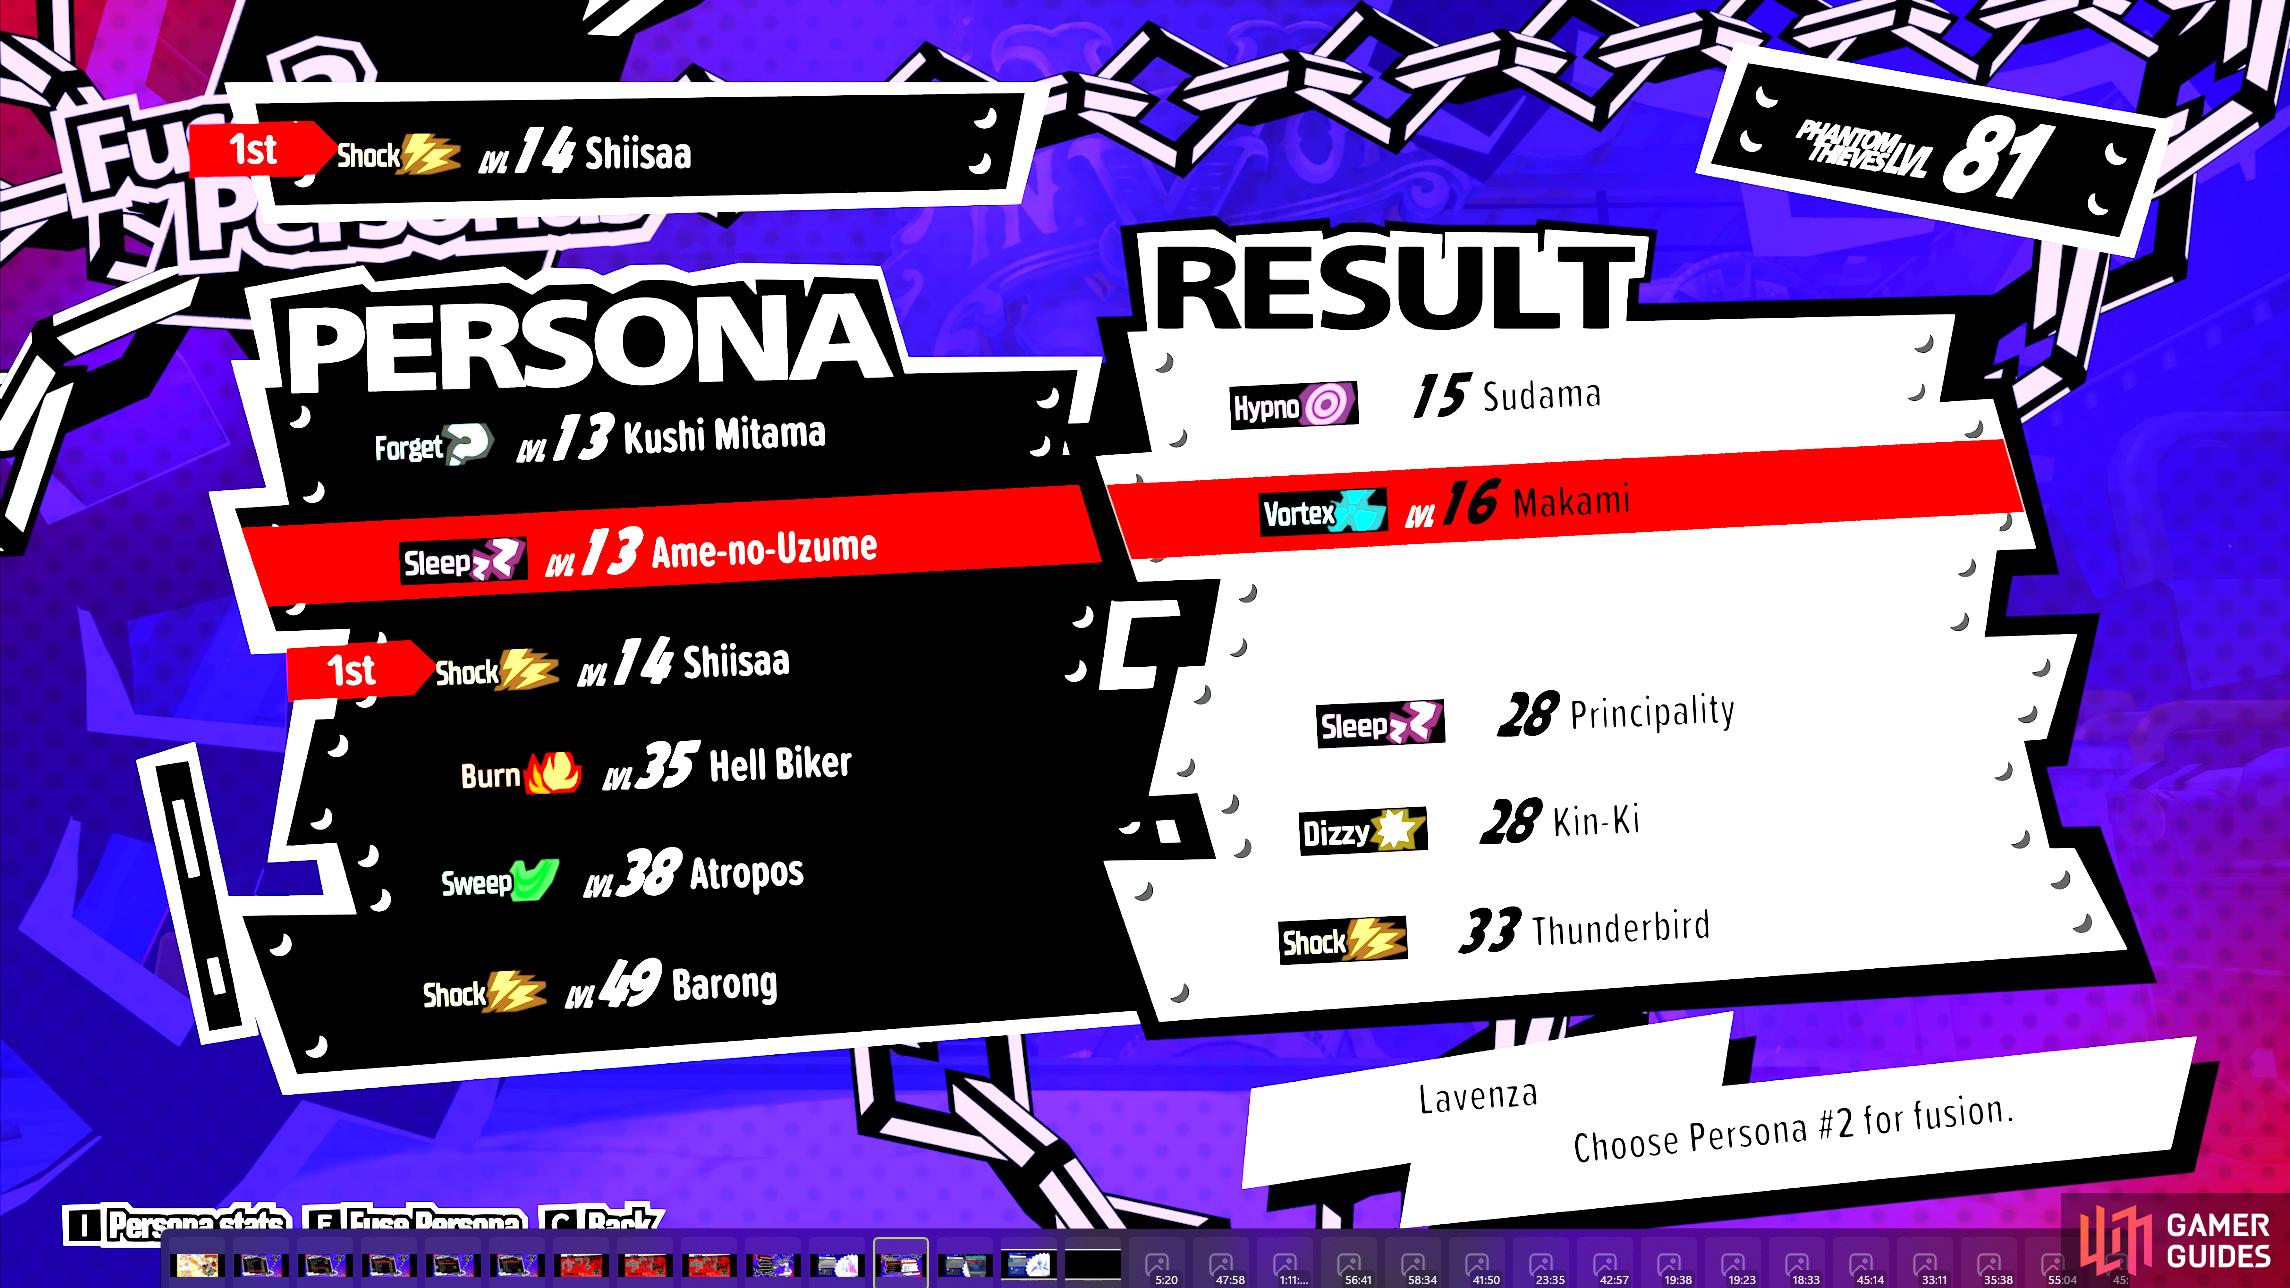 There are two ways to fuse Persona (three if you count Special). You can fuse two Personas together.